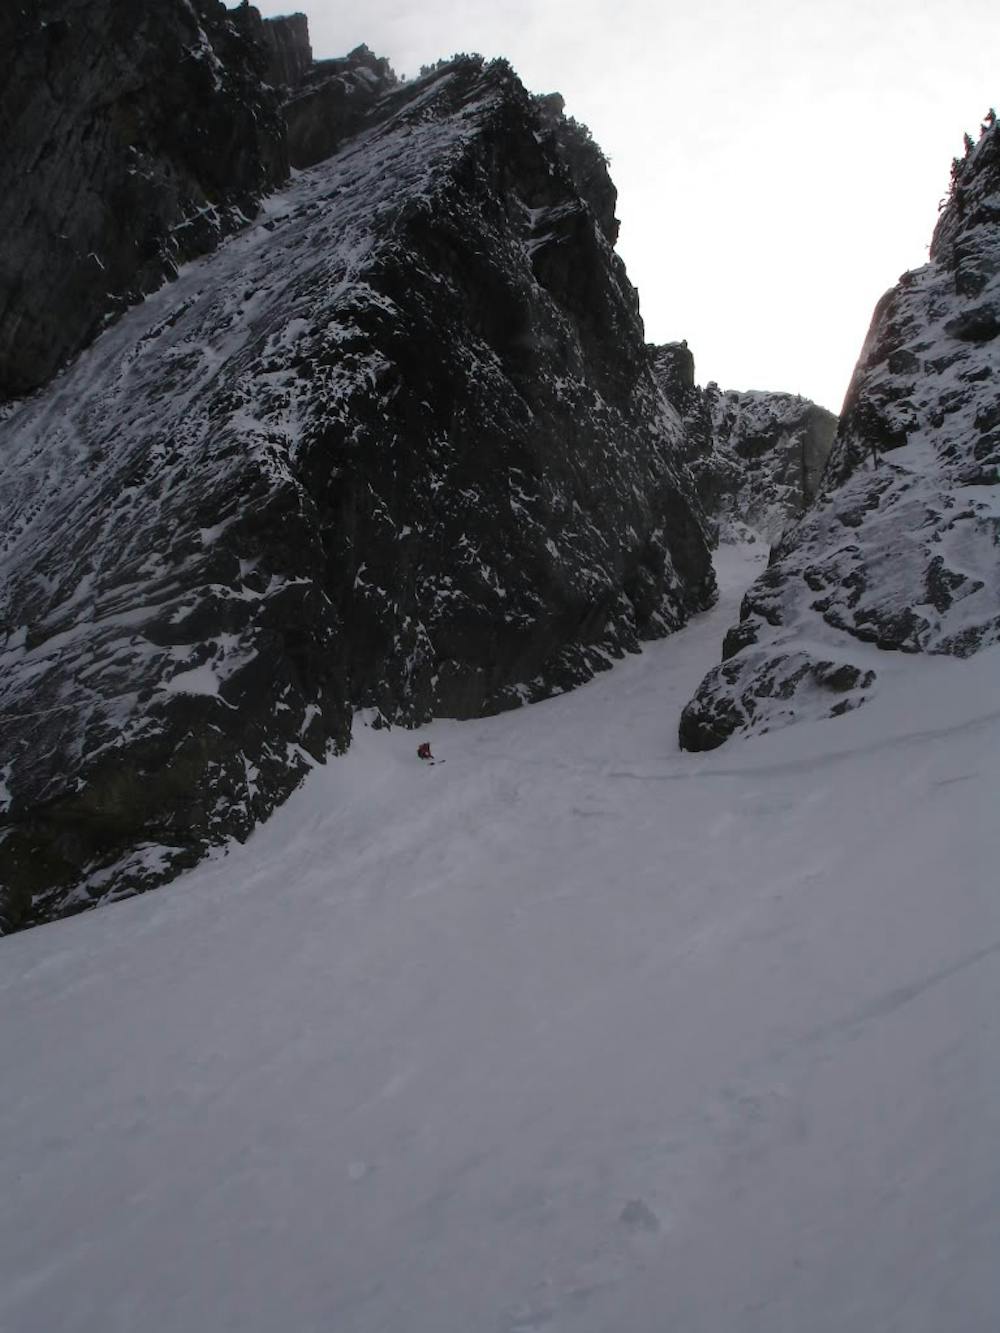 Skiing down the Slot Couloir